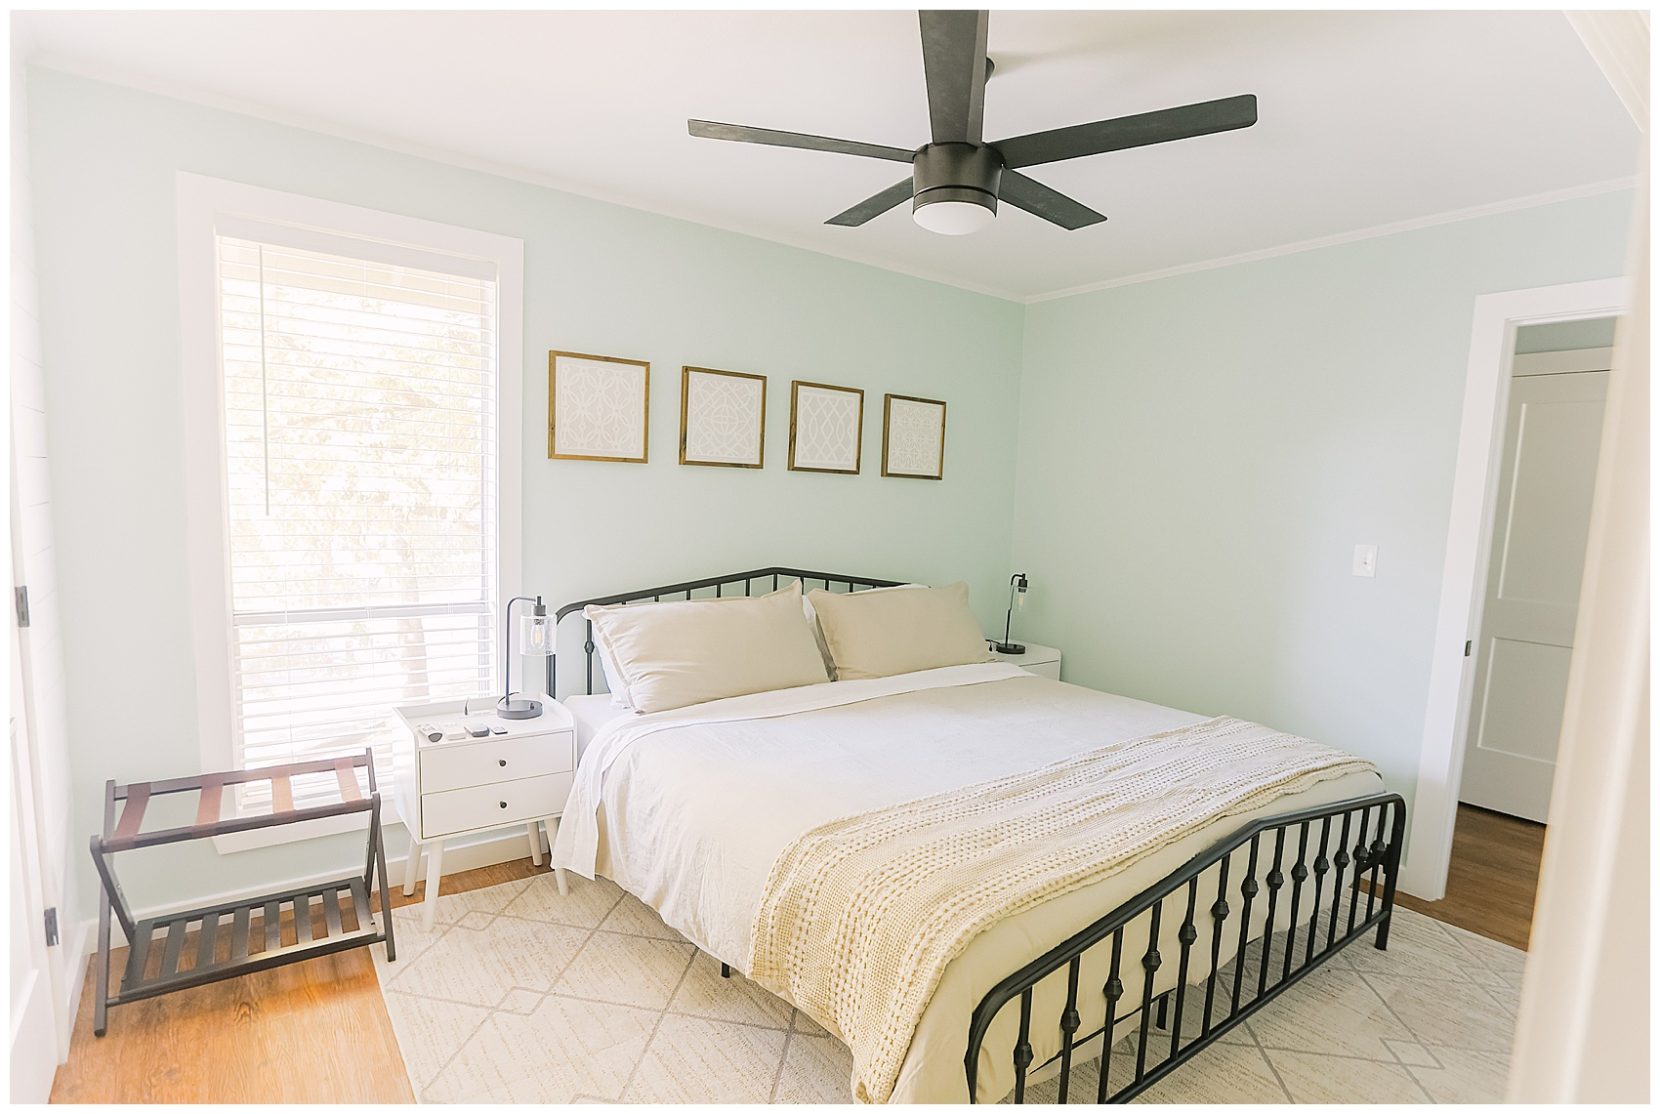 airbnb short term rental real estate photography jennie tewell 0003 1